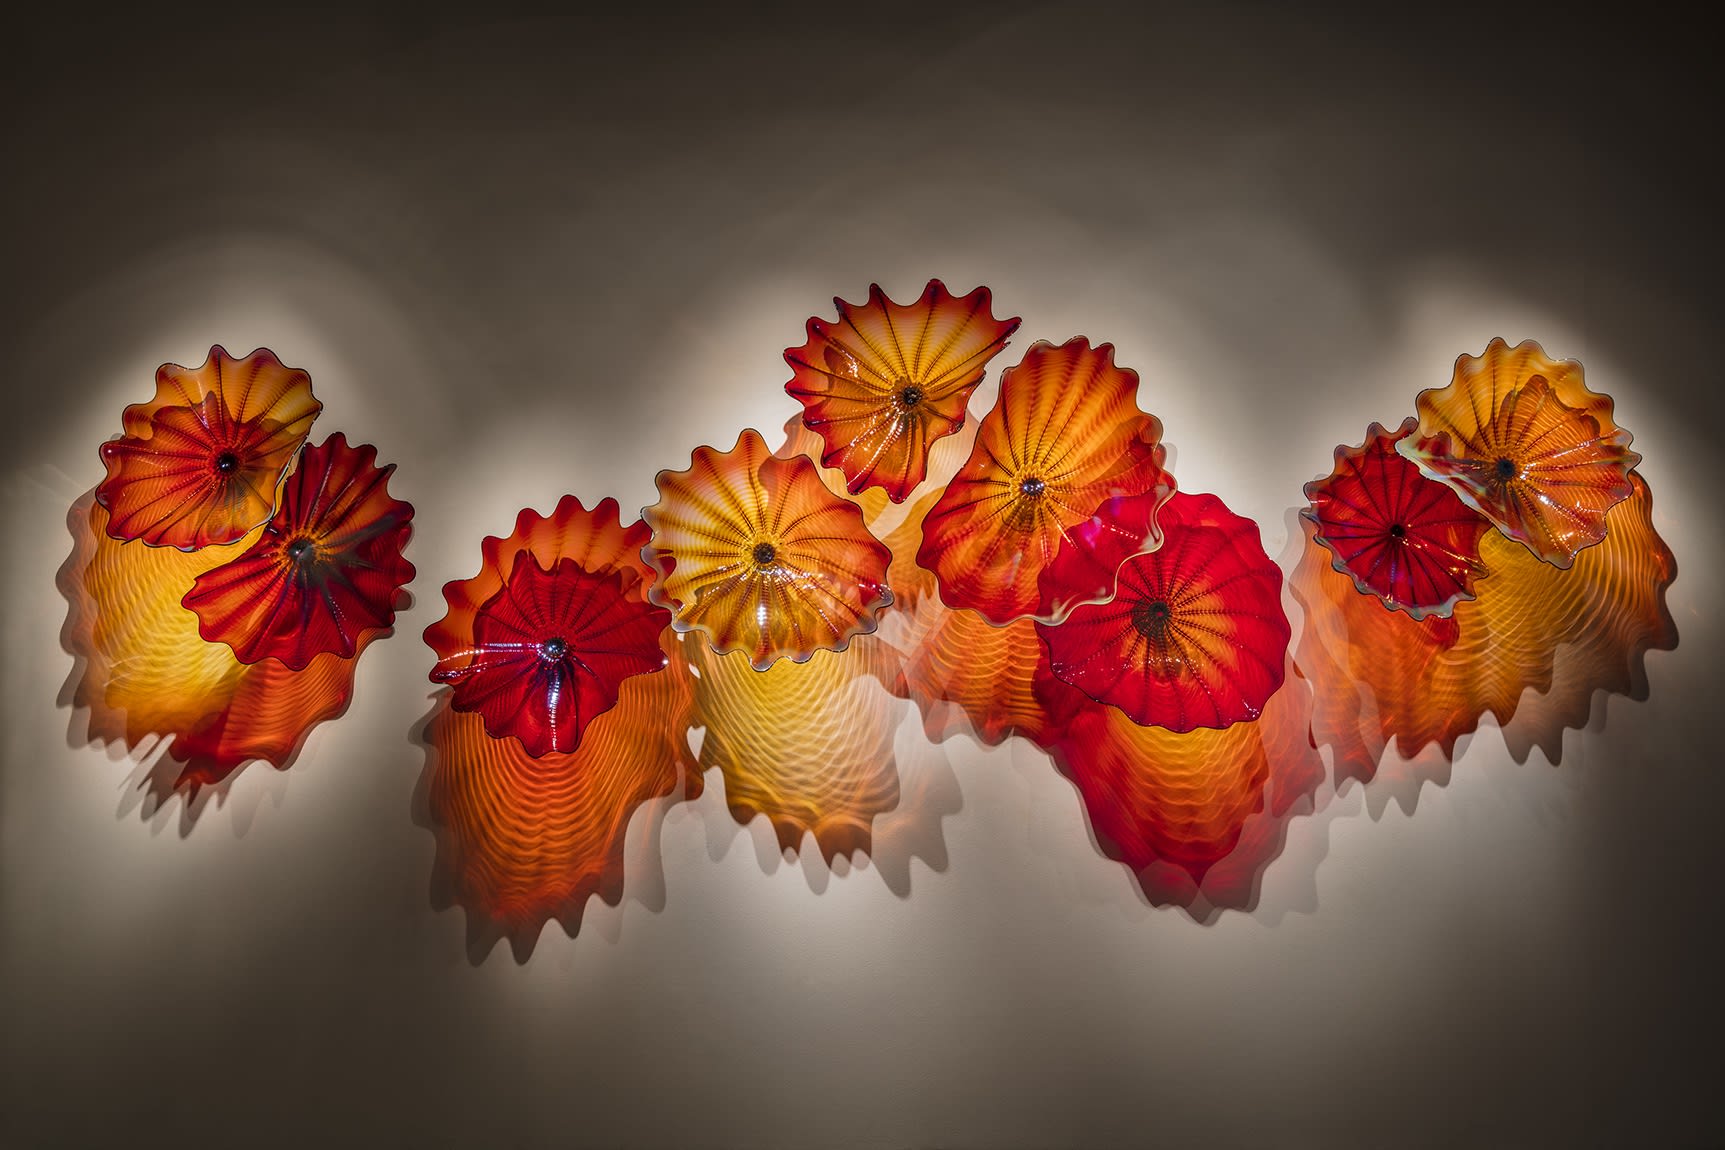 Dale Chihuly, Copper Ruby Persian Wall, 2018, 5 x 15 1/2 x 2 feet © 2023 Chihuly Studio. All Rights Reserved.